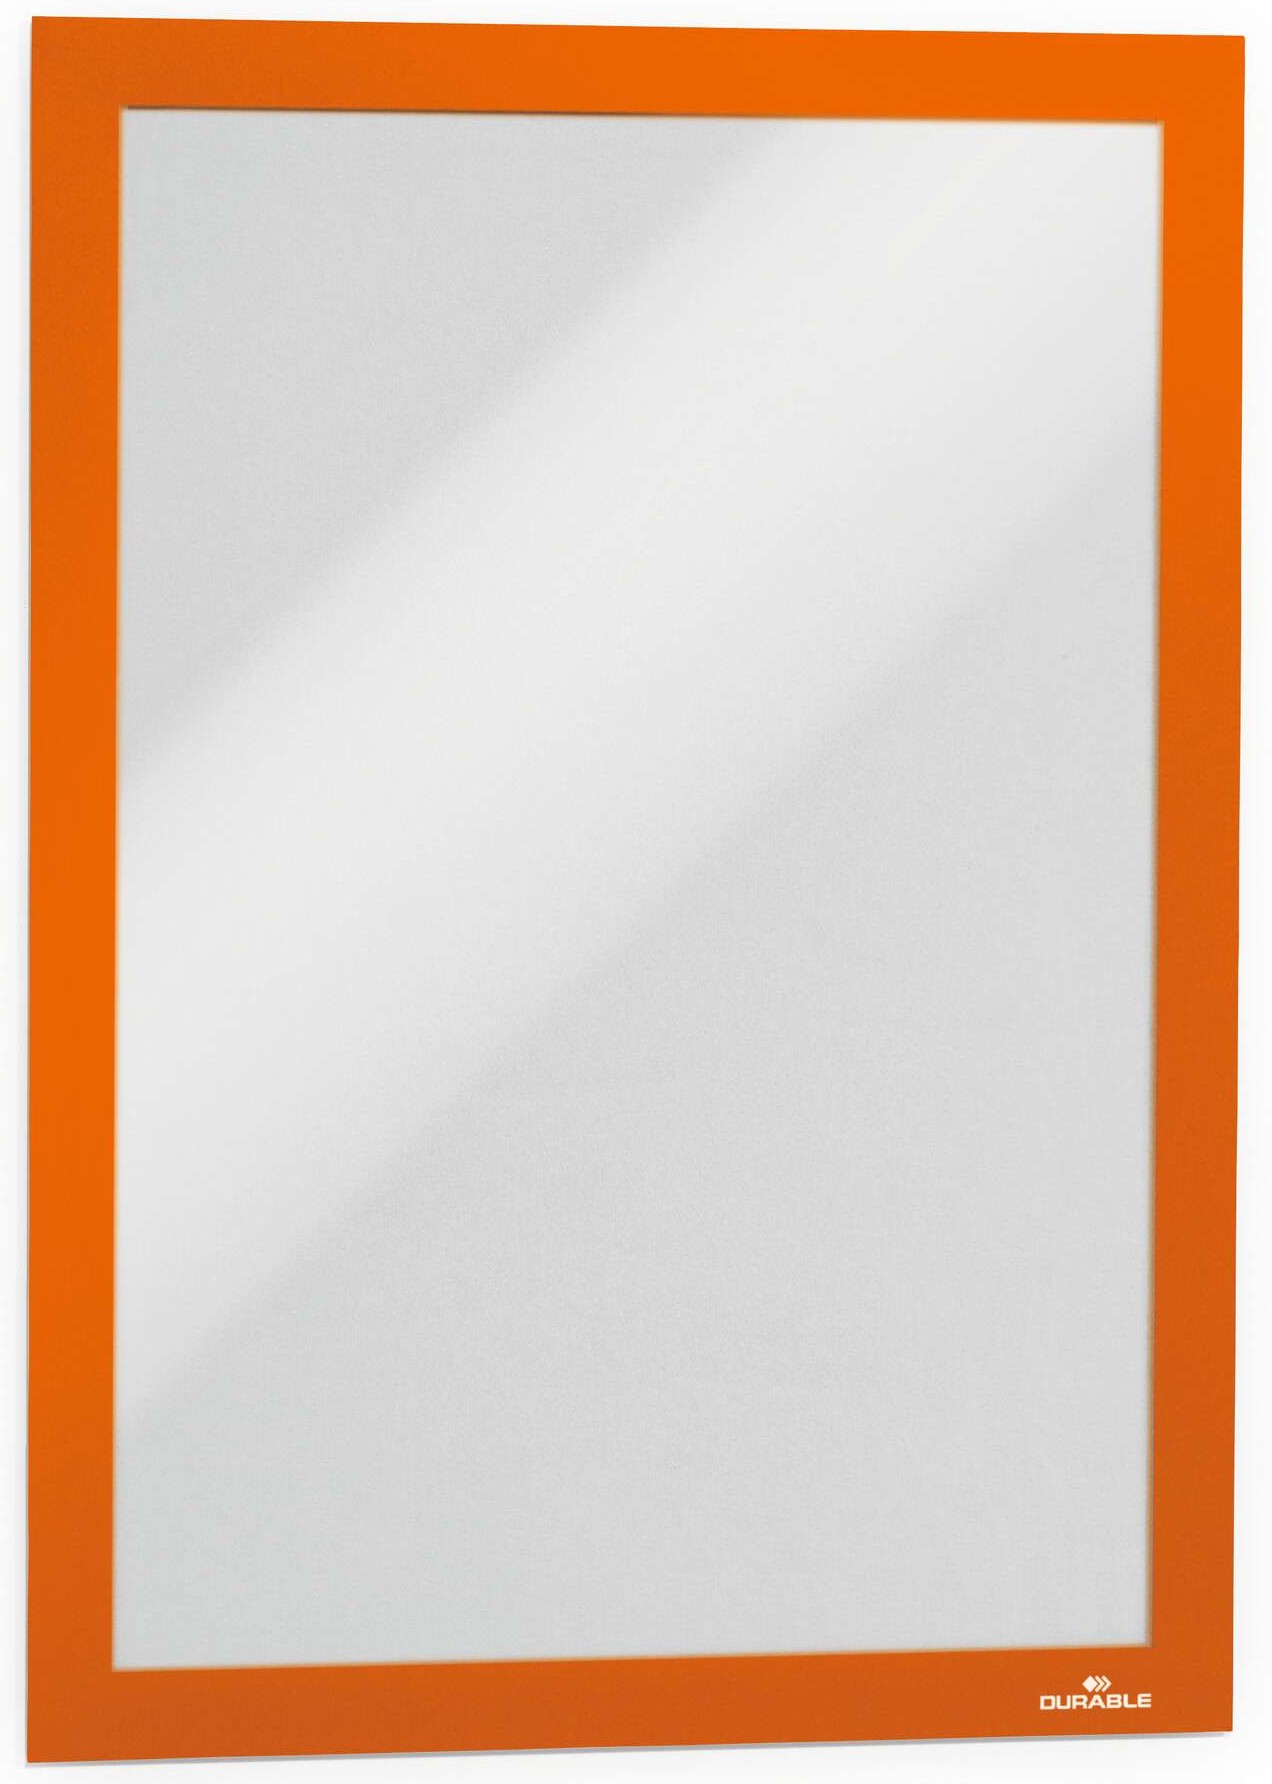 Orange A4 double-sided adhesive magnetic frame